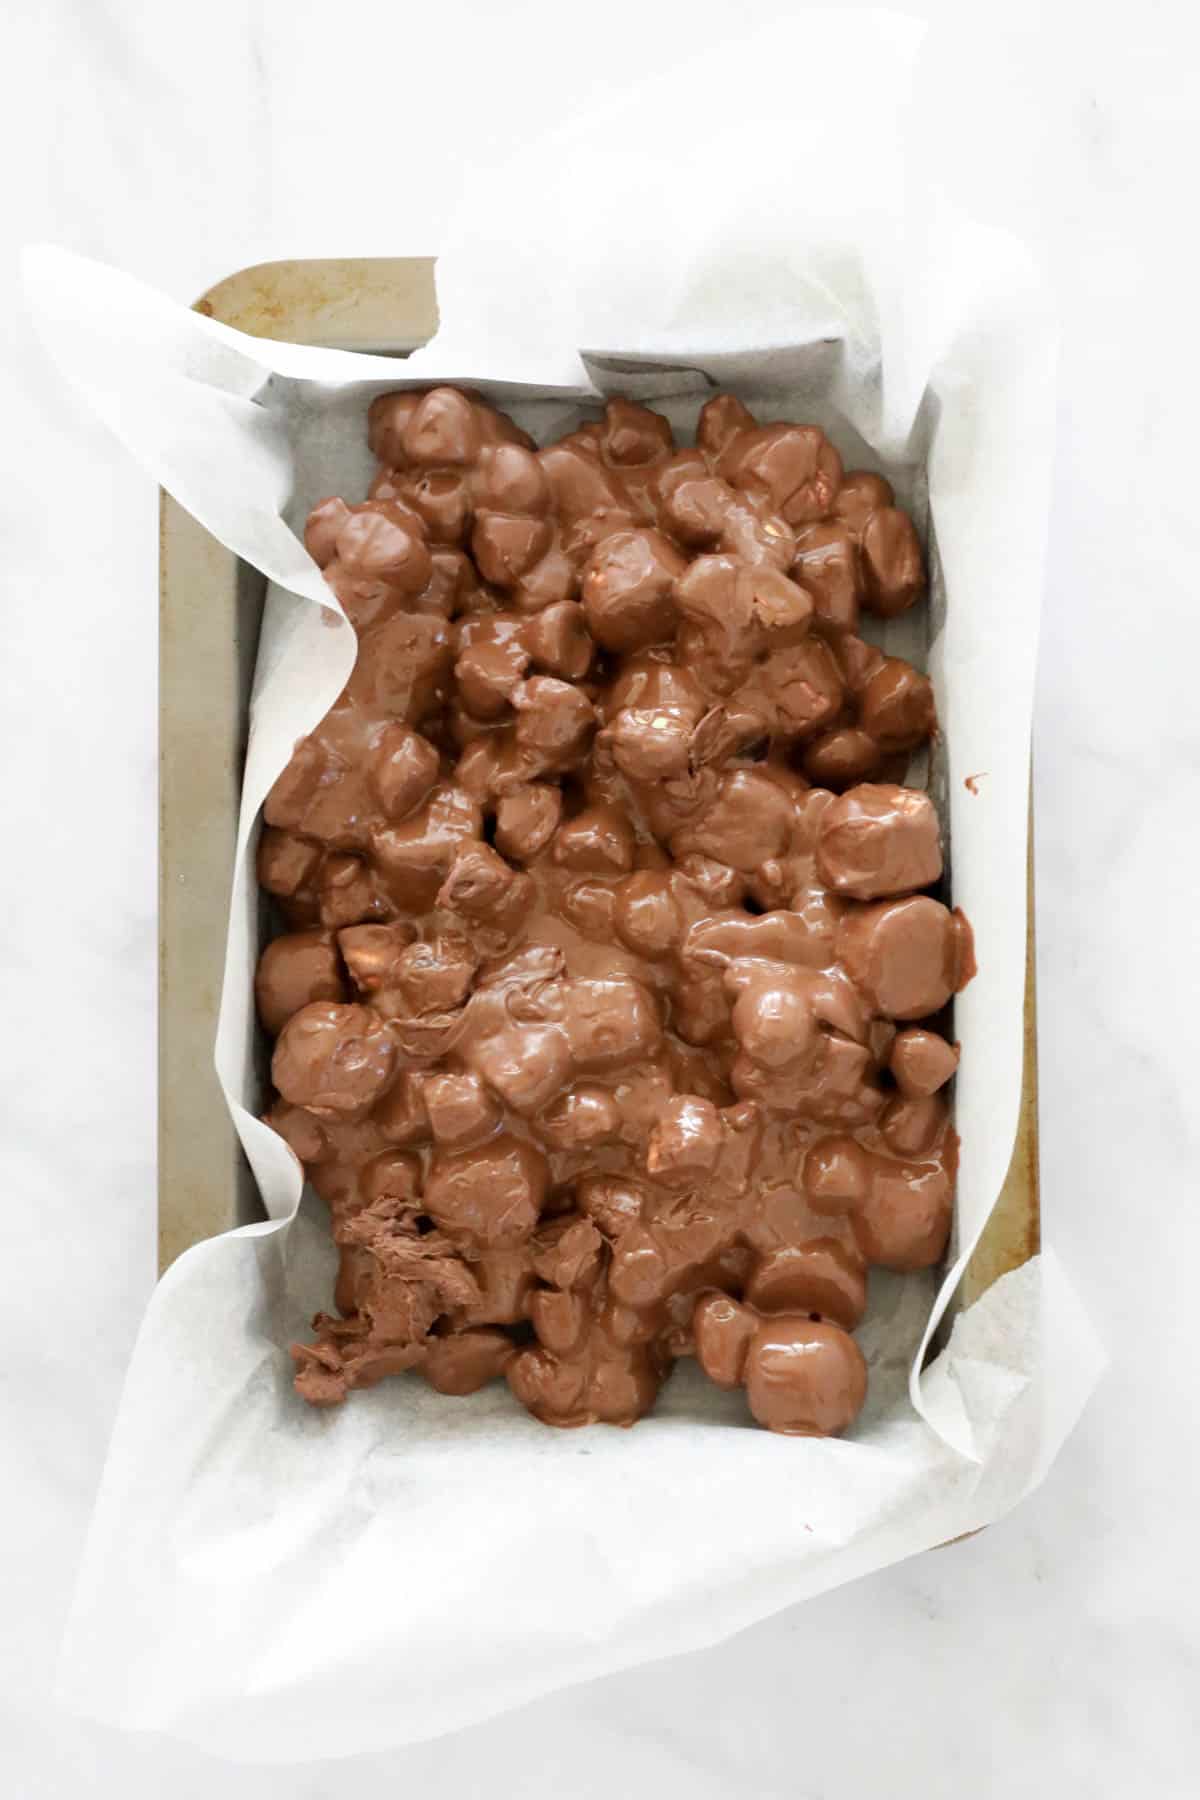 Rocky road in a baking tin.